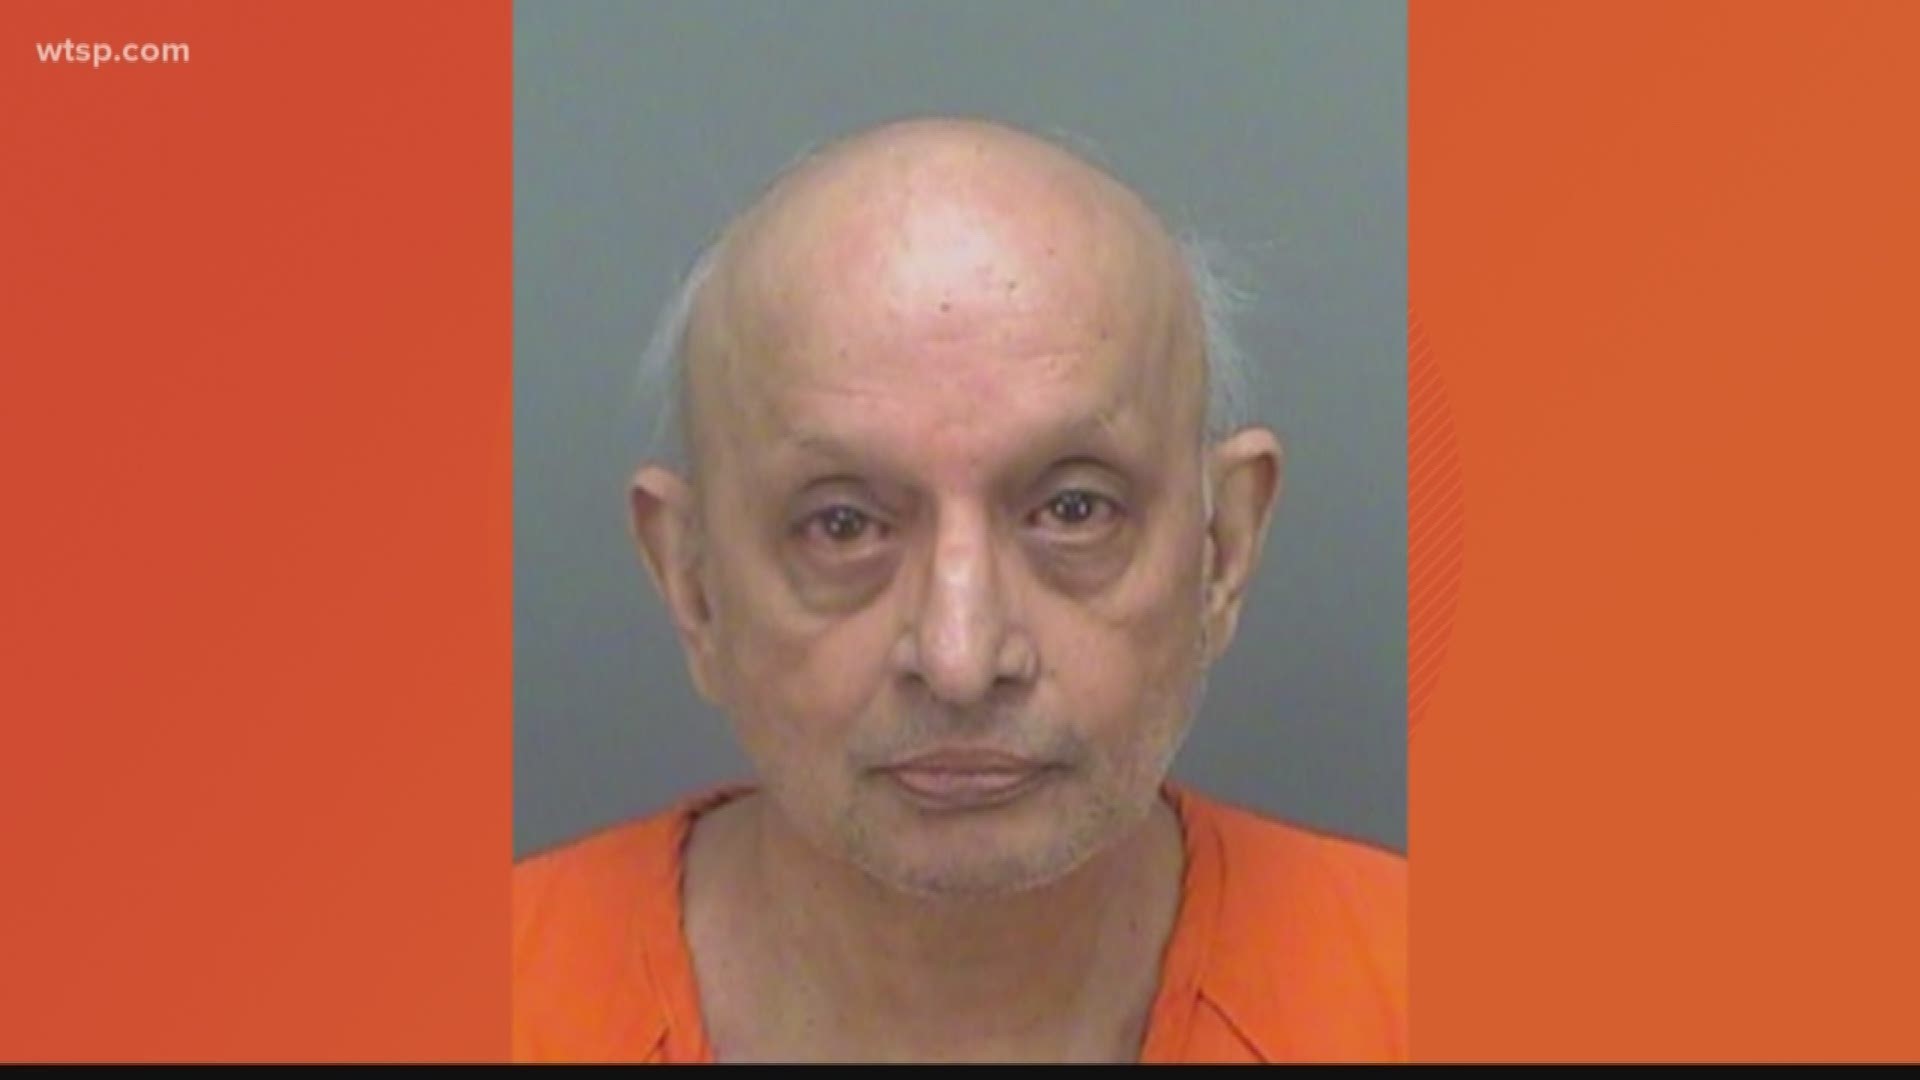 Neil Singhal, 69, is charged with DUI manslaughter. https://on.wtsp.com/3229S1i